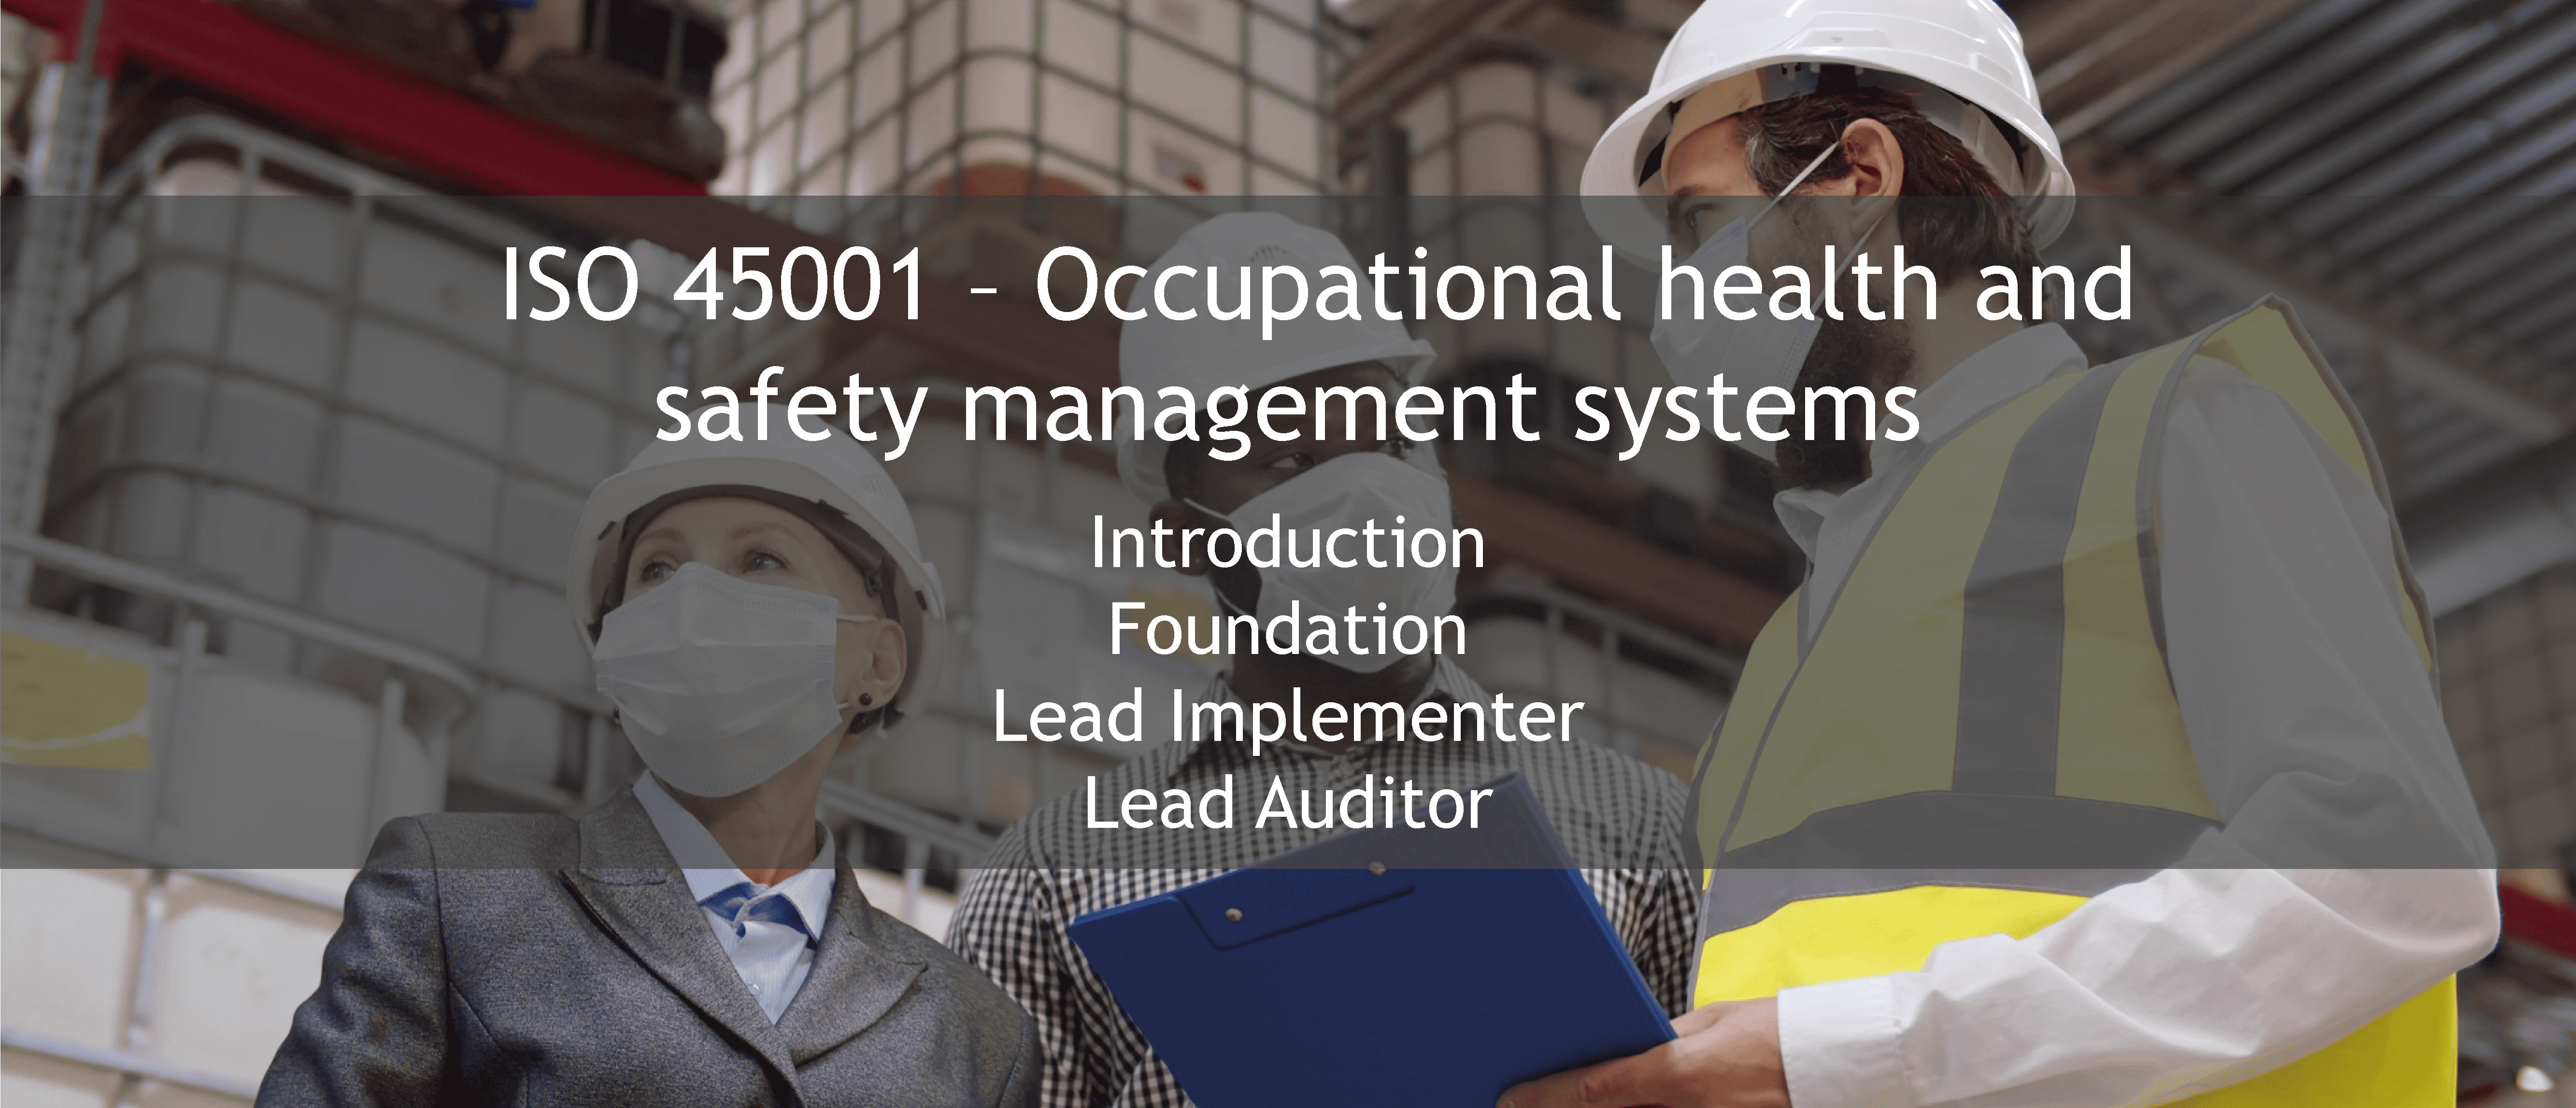 ISO 45001 training offer - ISO 26000 Guidance on social responsibility